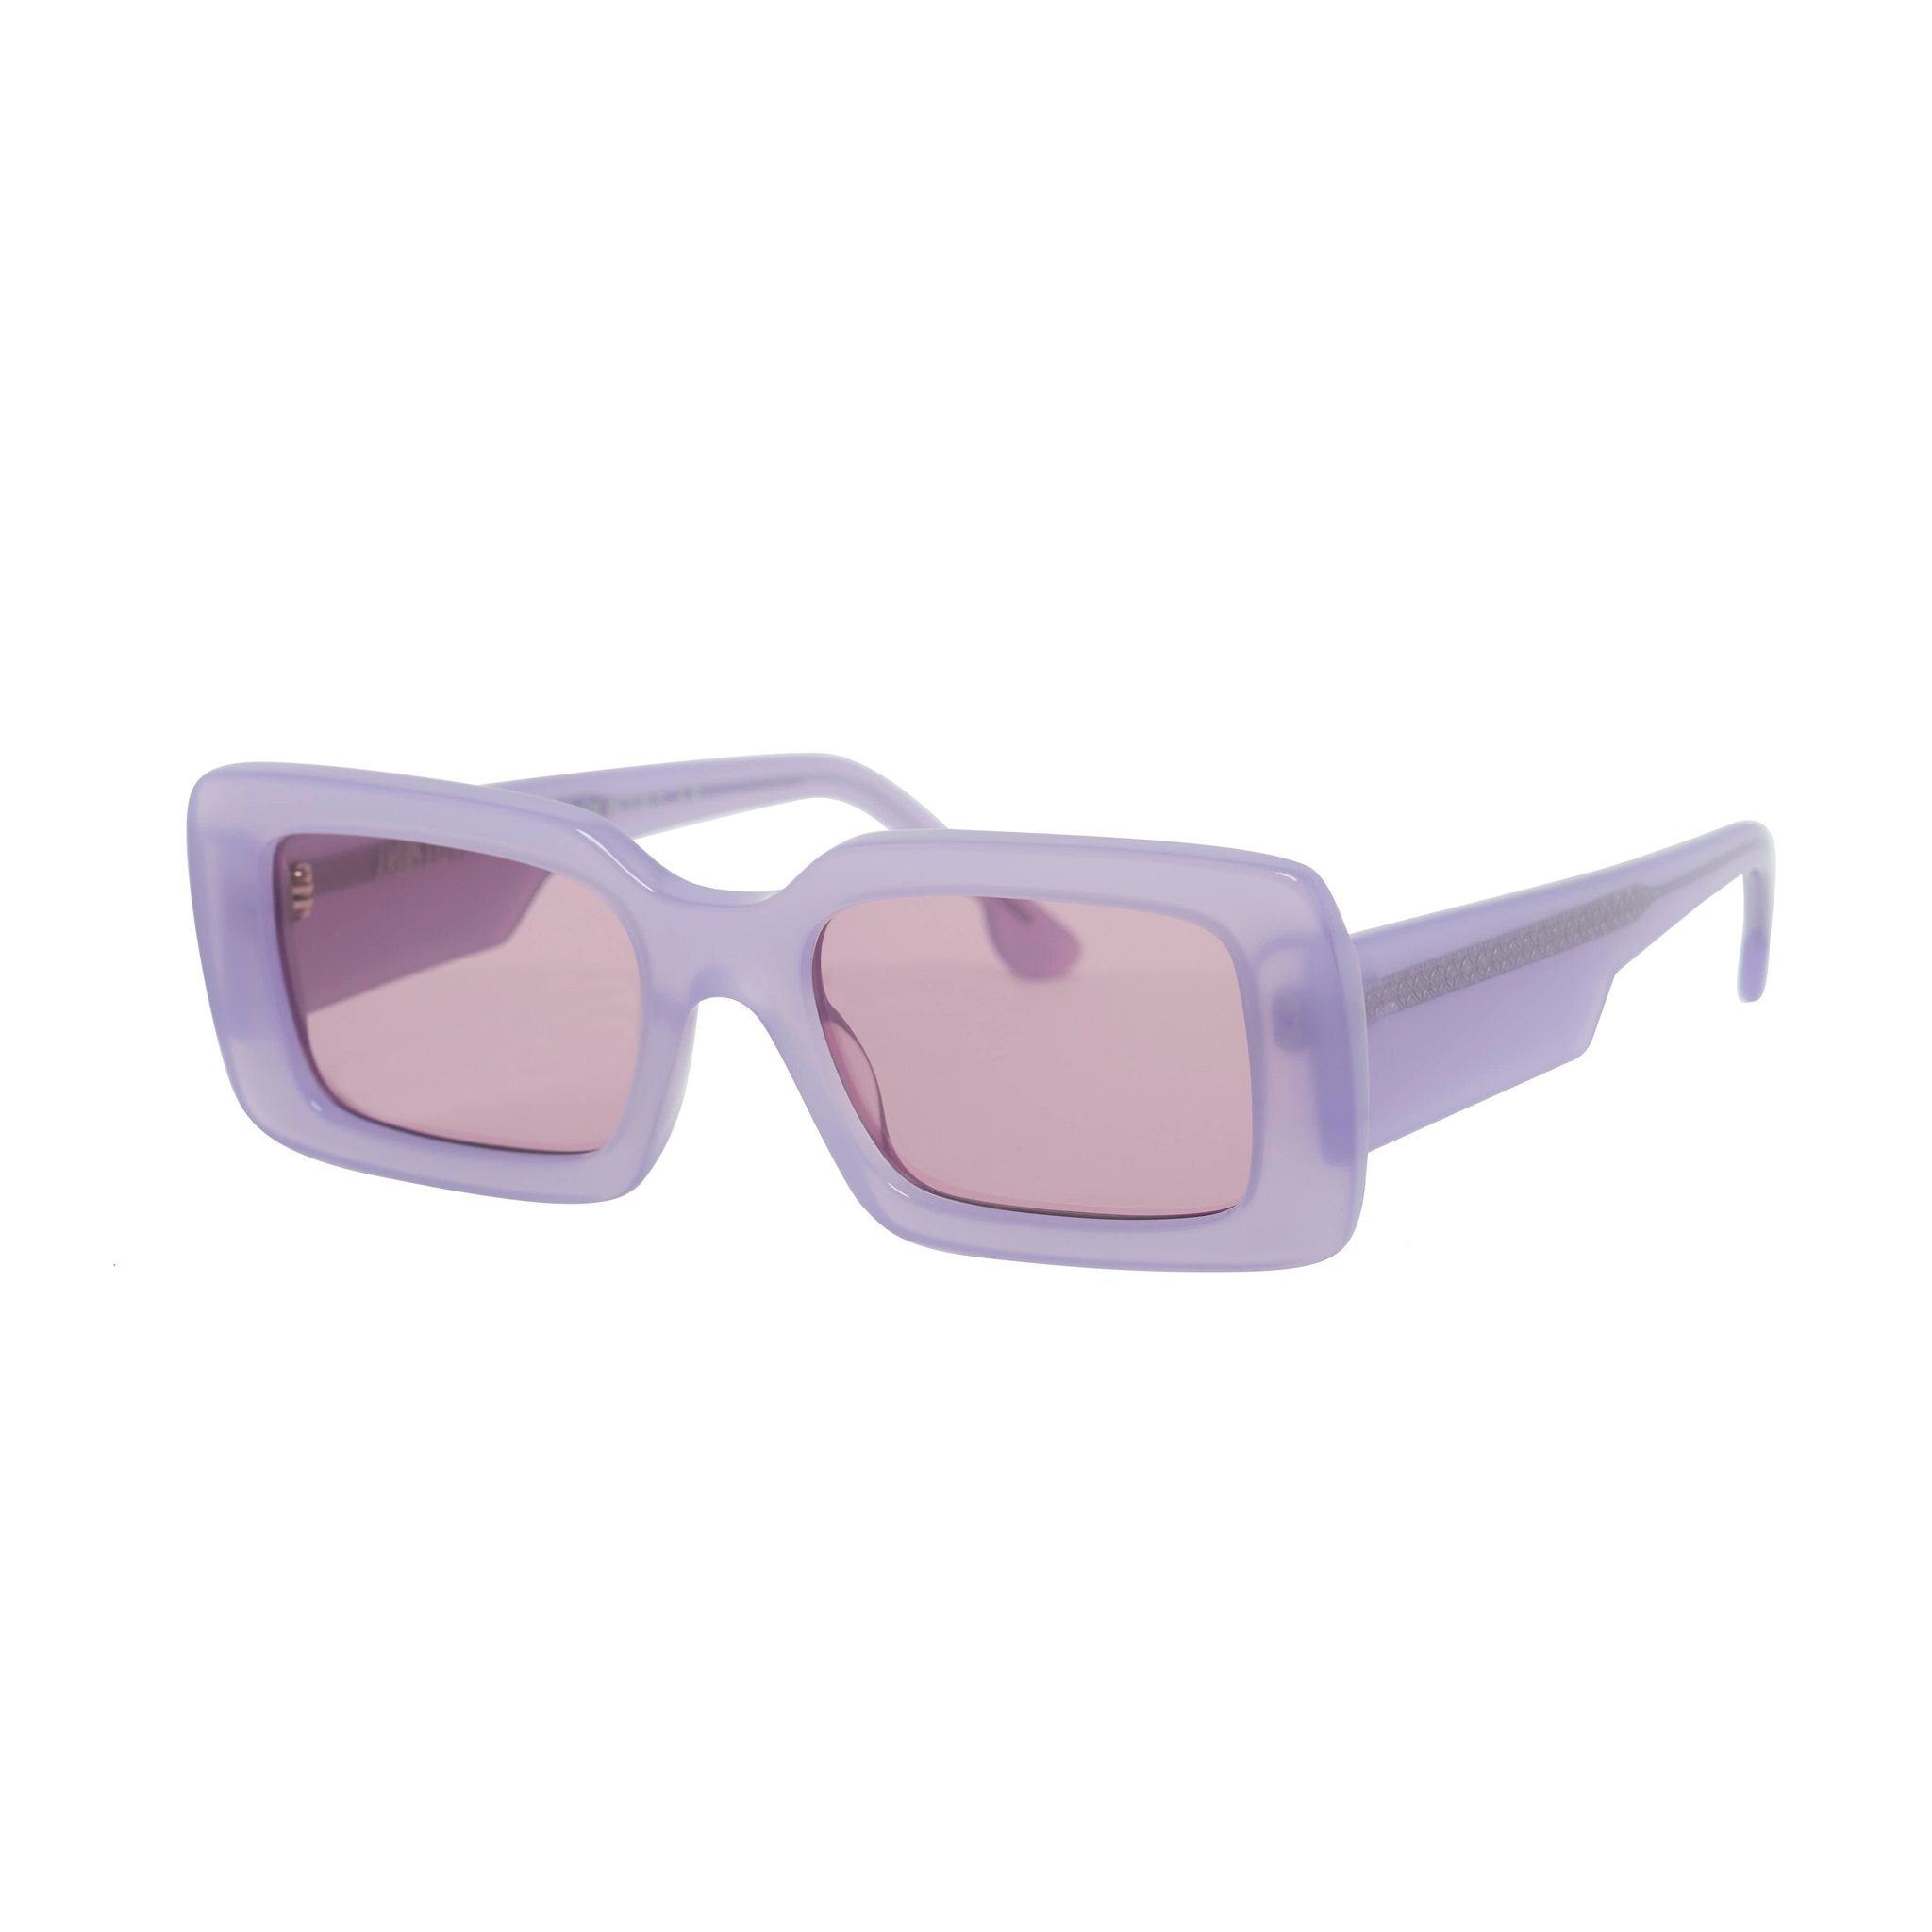 Purple sunglasses frames with pink lenses handmade in italy. Front view